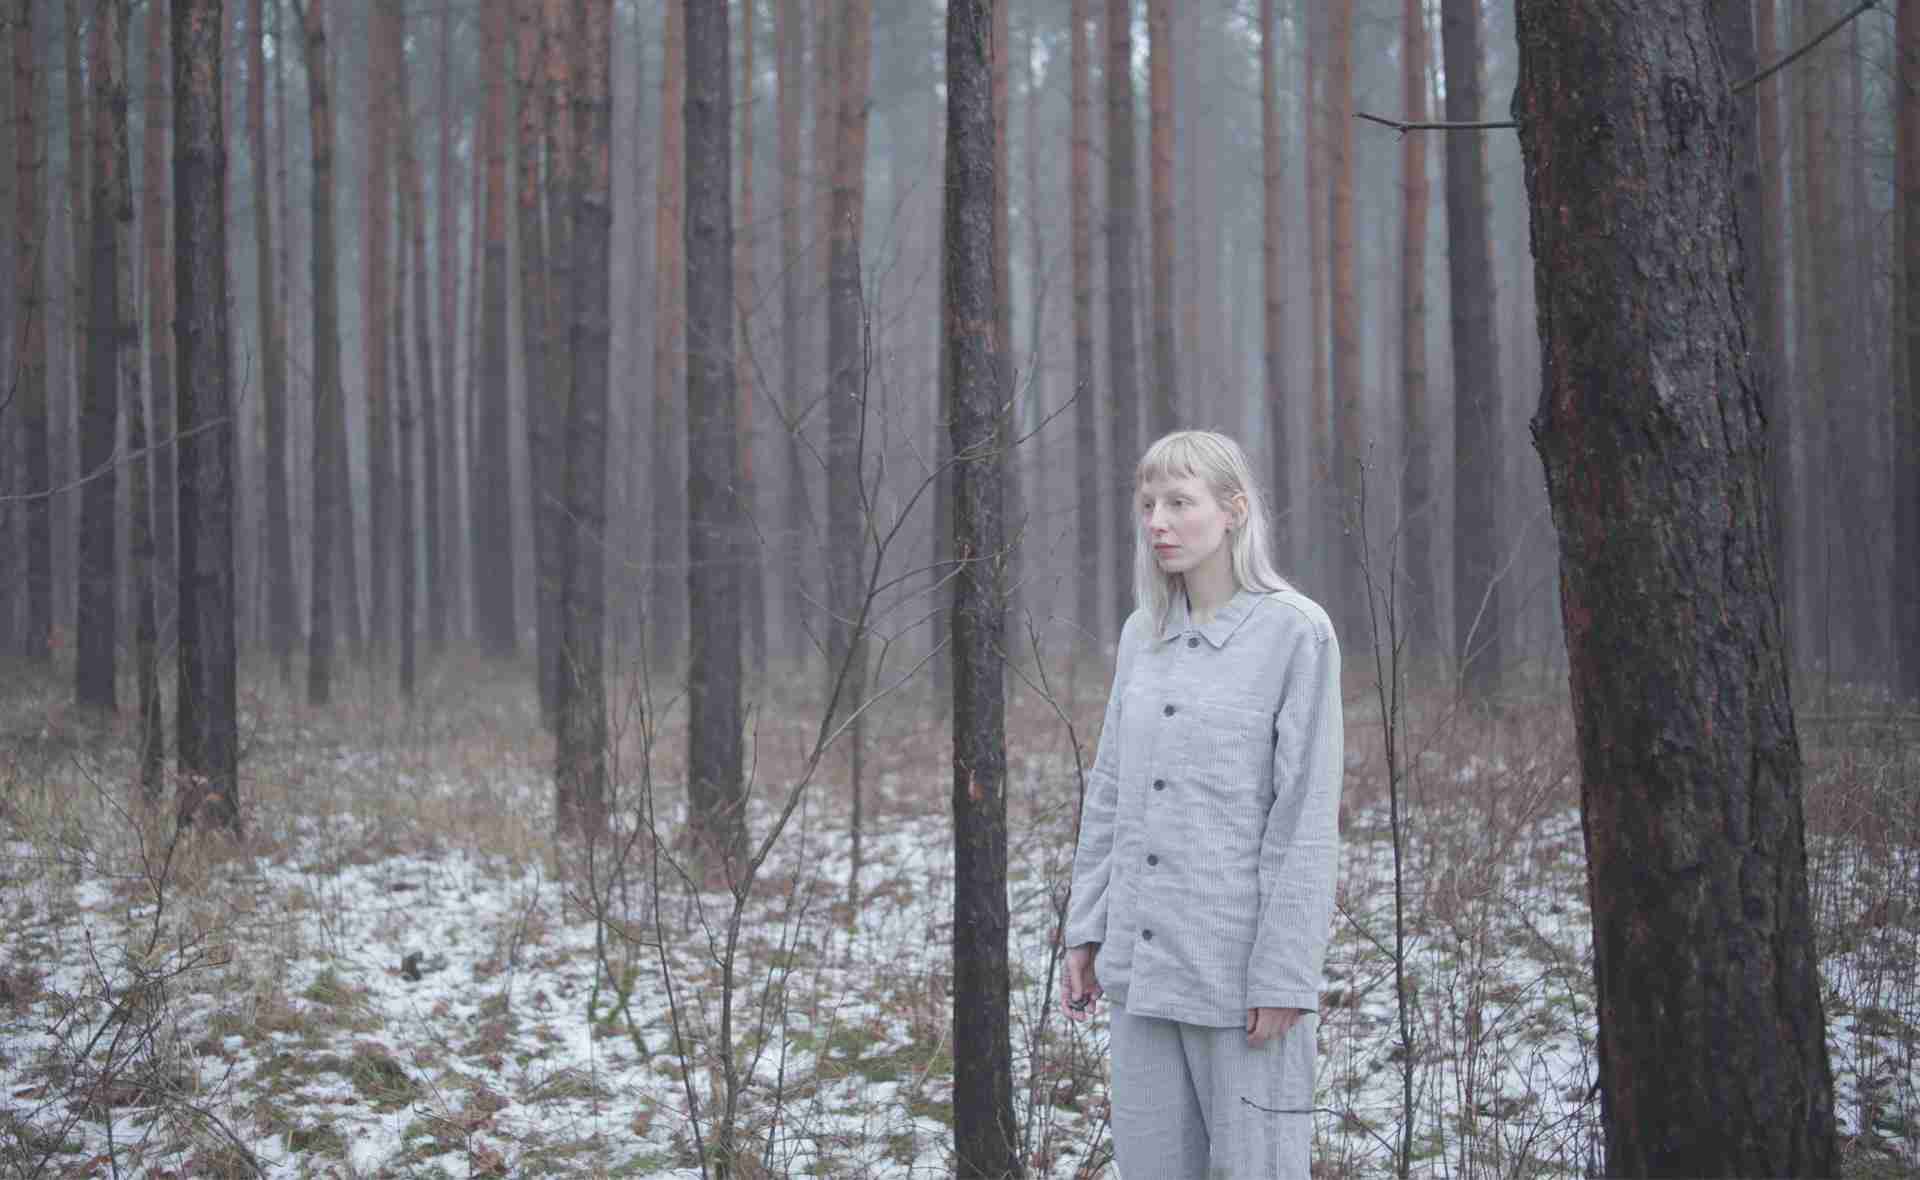 Still picture from the video 'Between trees' (Eszter Galambos)